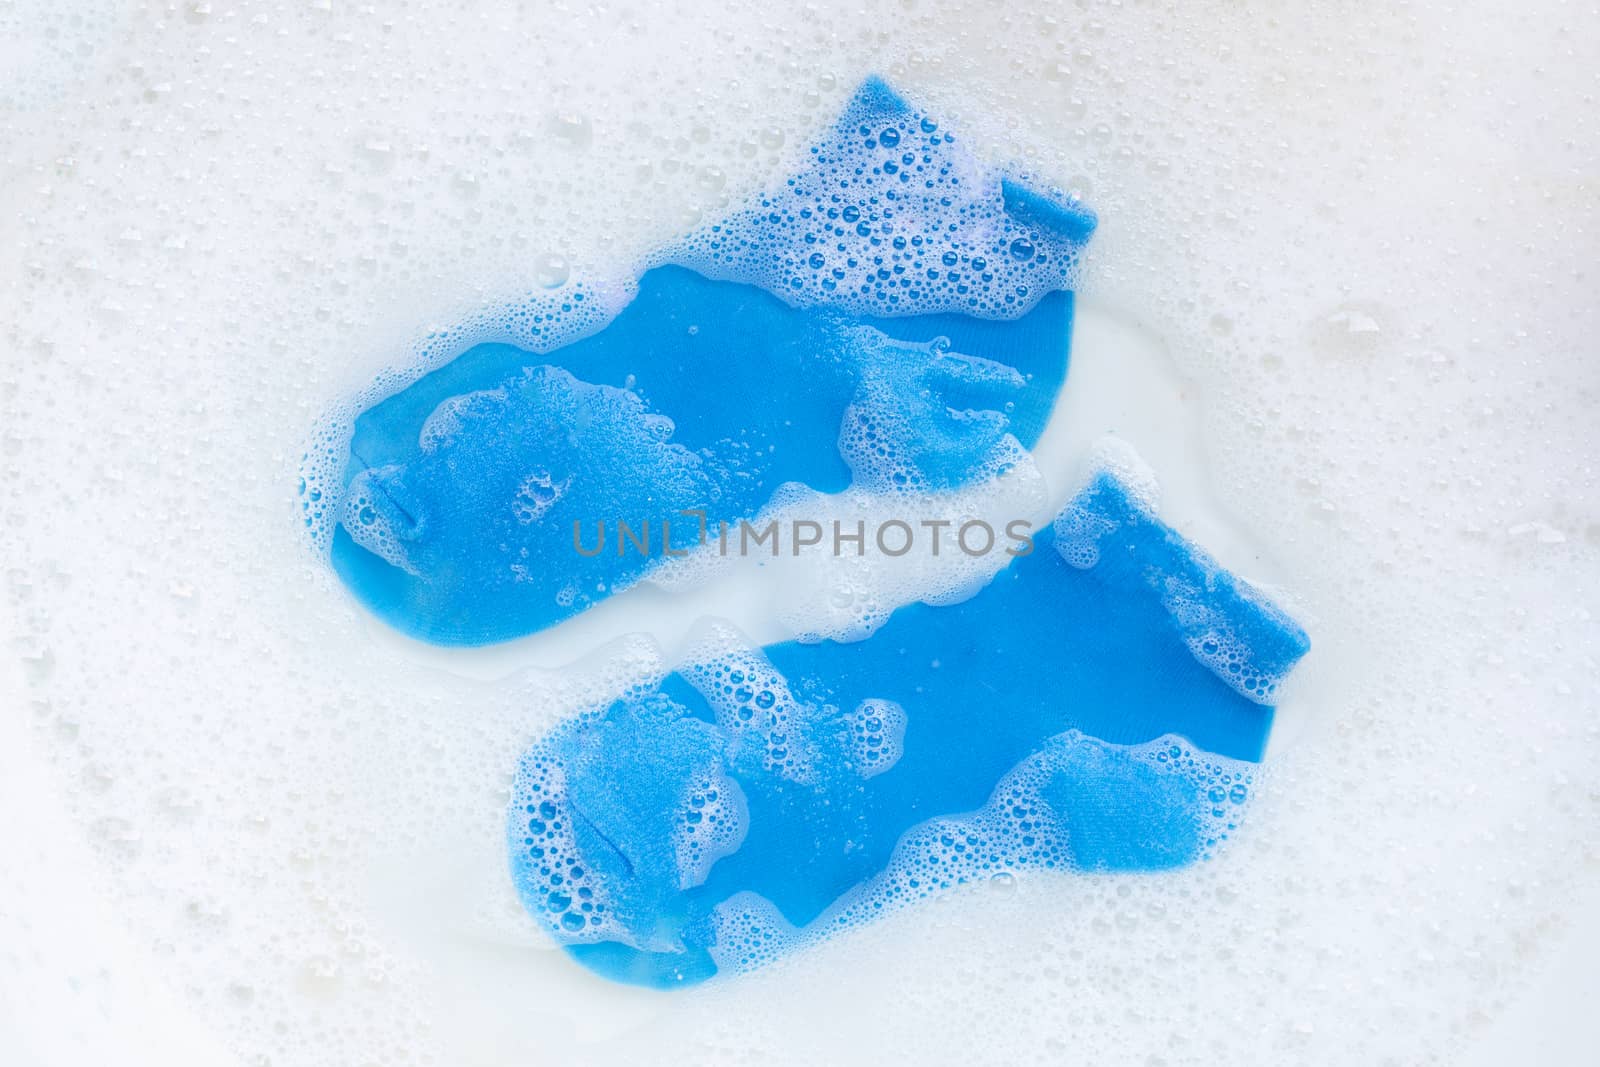 Blue socks soaking in powder detergent water dissolution. Laundry concept. Top view